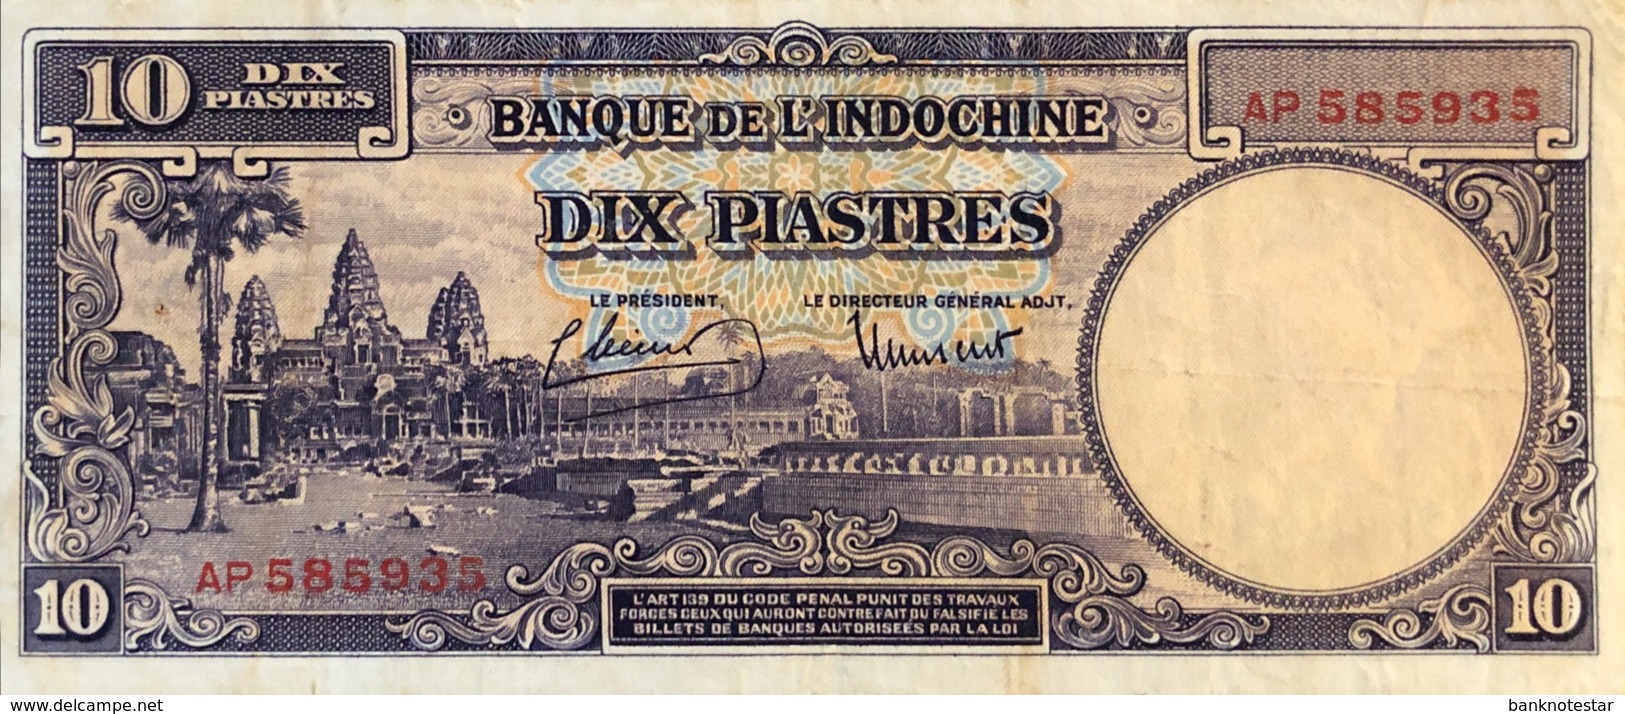 French Indochina 10 Piastres, P-80 - Very Fine - Indochina